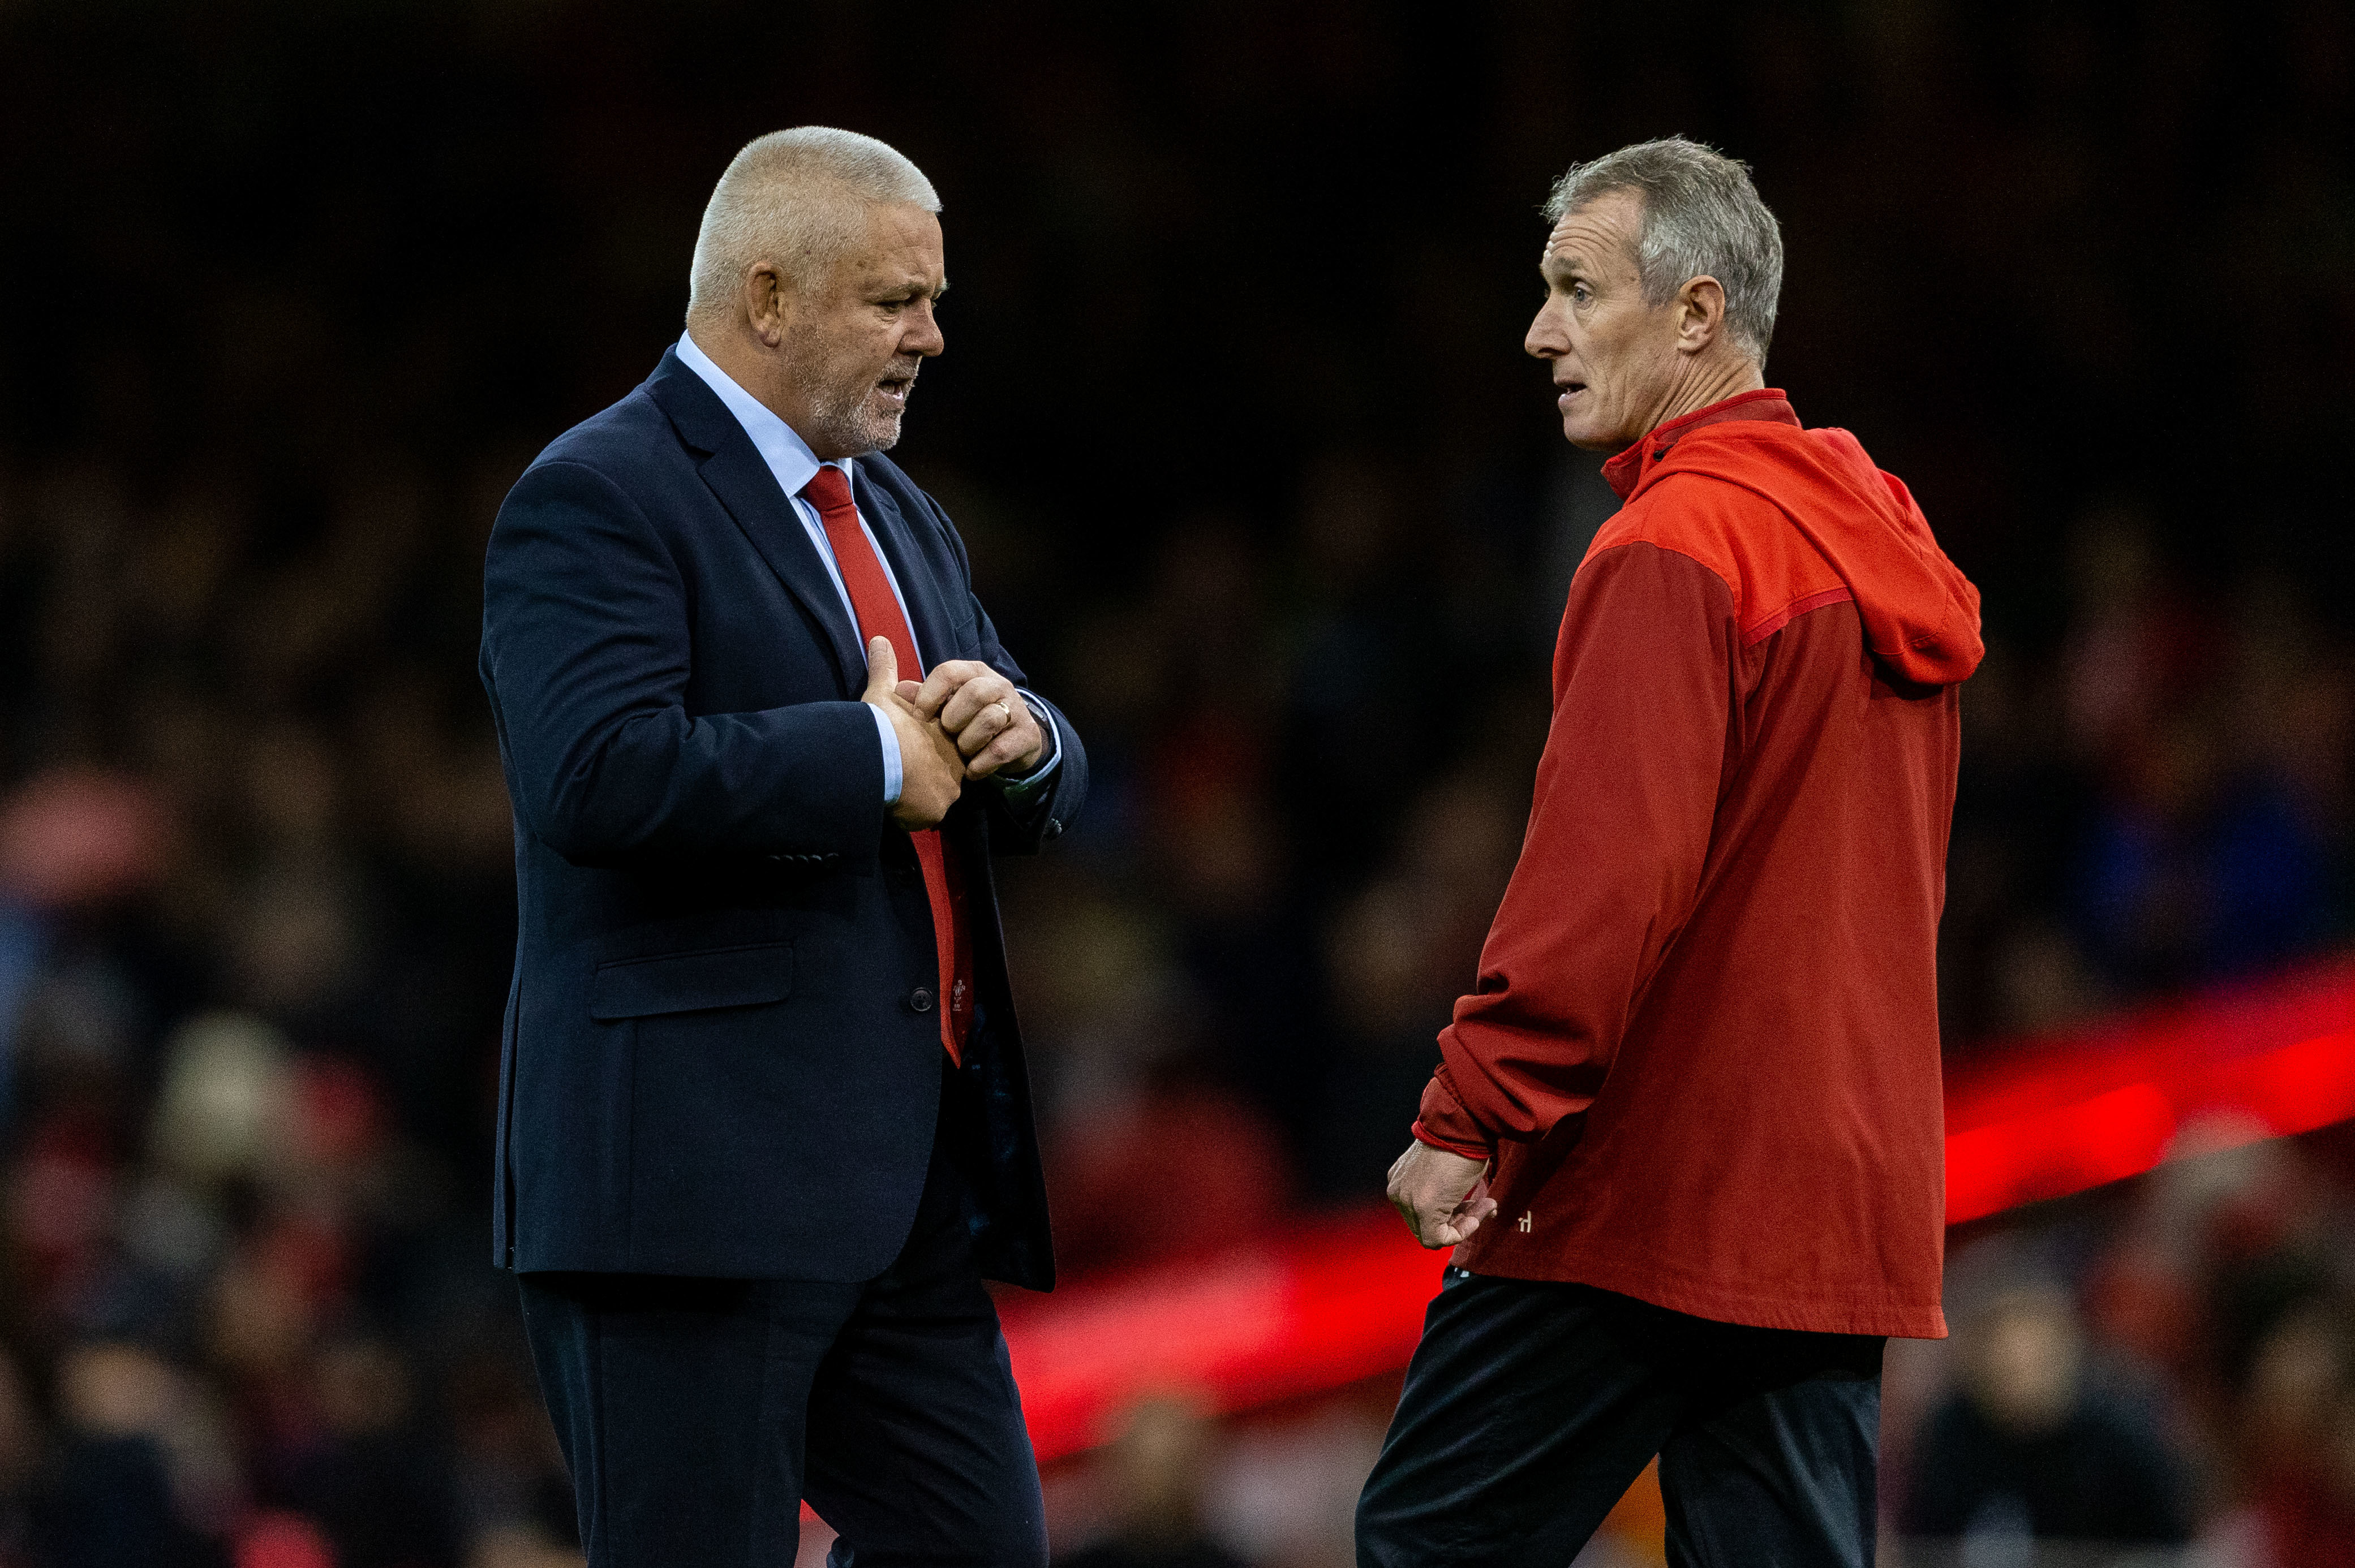 Warren Gatland (left) and Rob Howley (right) have worked together with Wales and the Lions